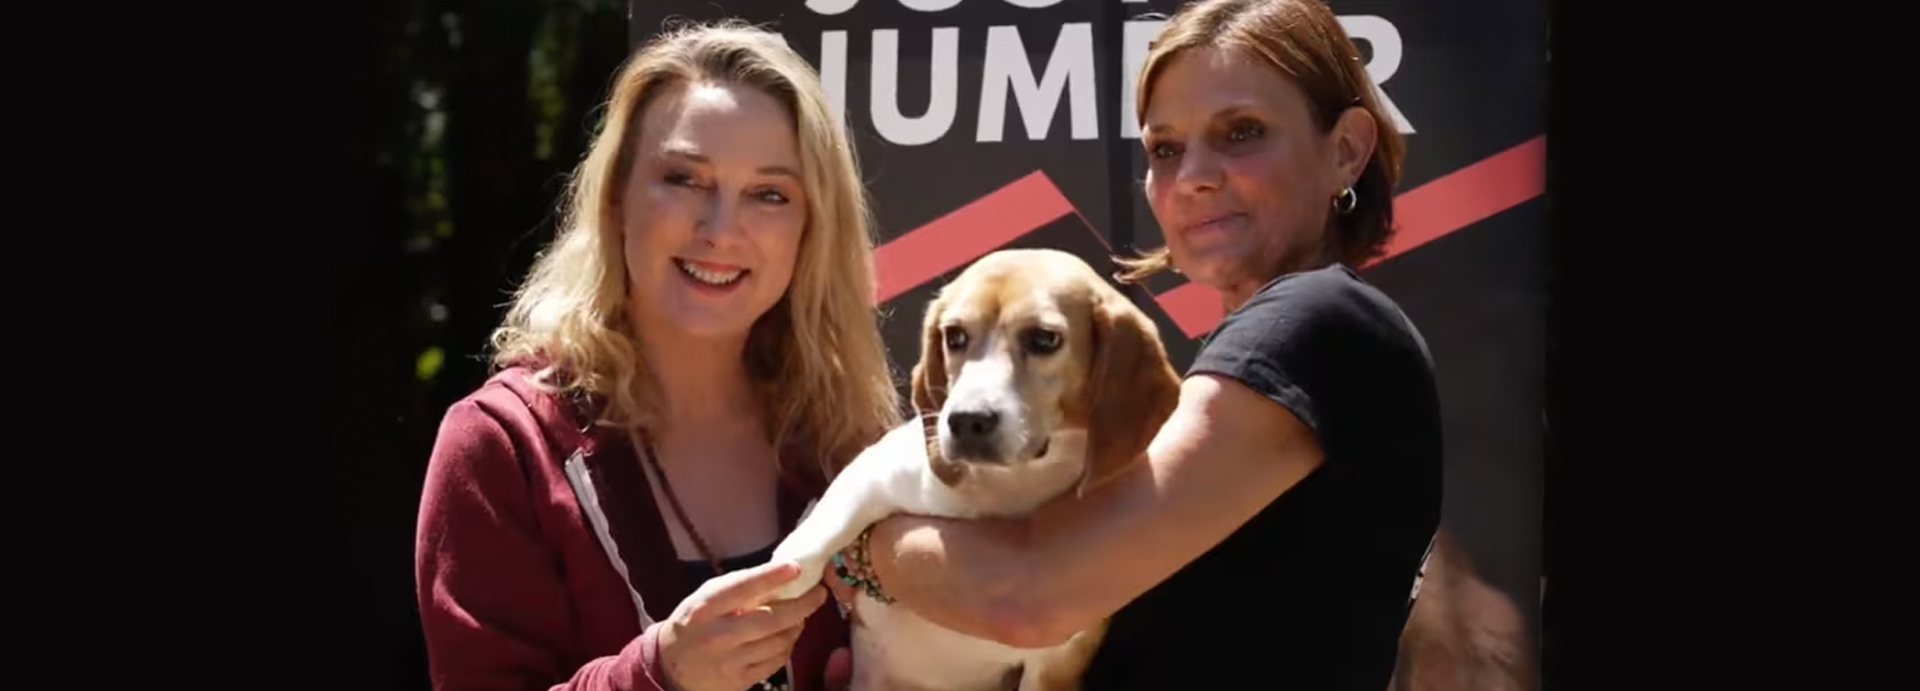 Beagle Freedom Project is rescuing research dogs in Florida. How you can help